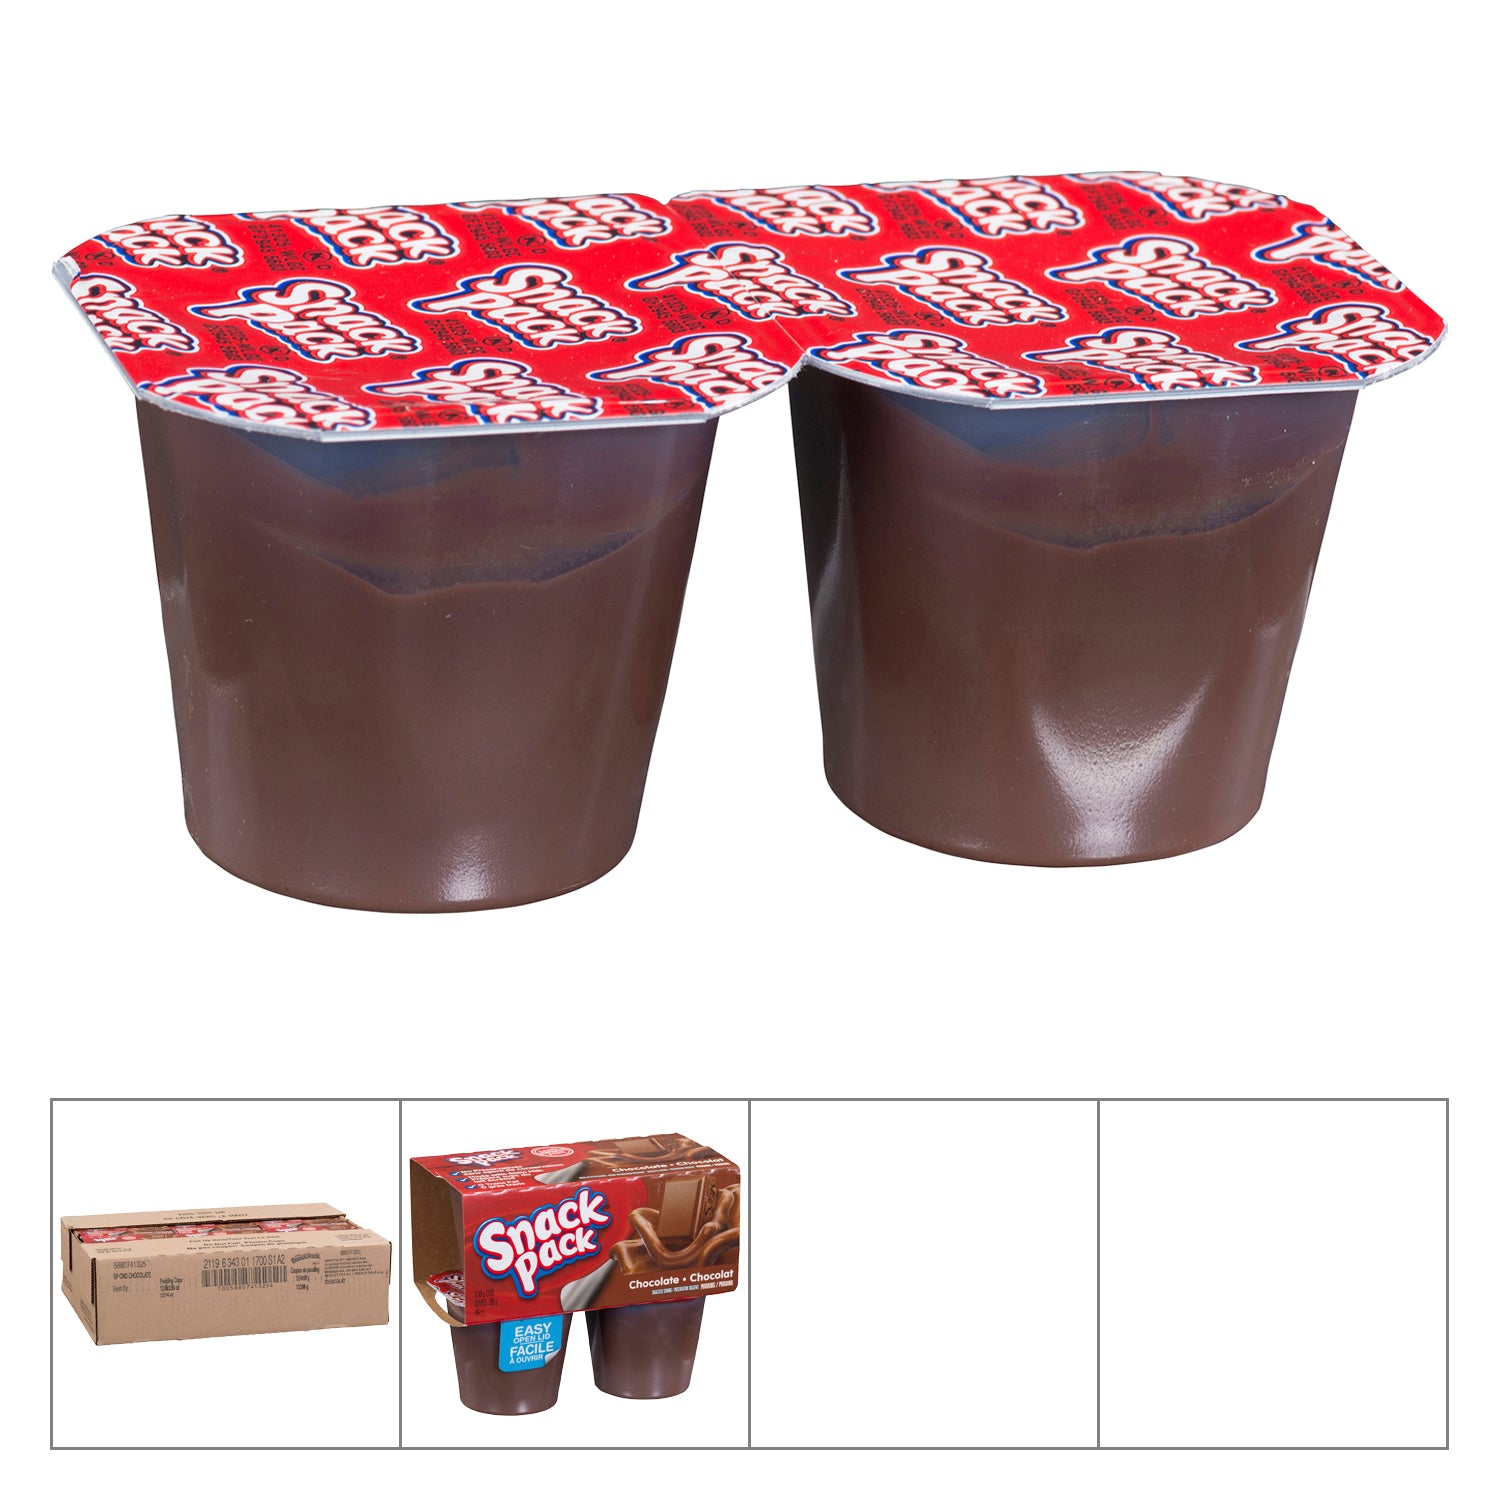 Snack Pack Chocolate Pudding 48x99g [$0.77/ea]